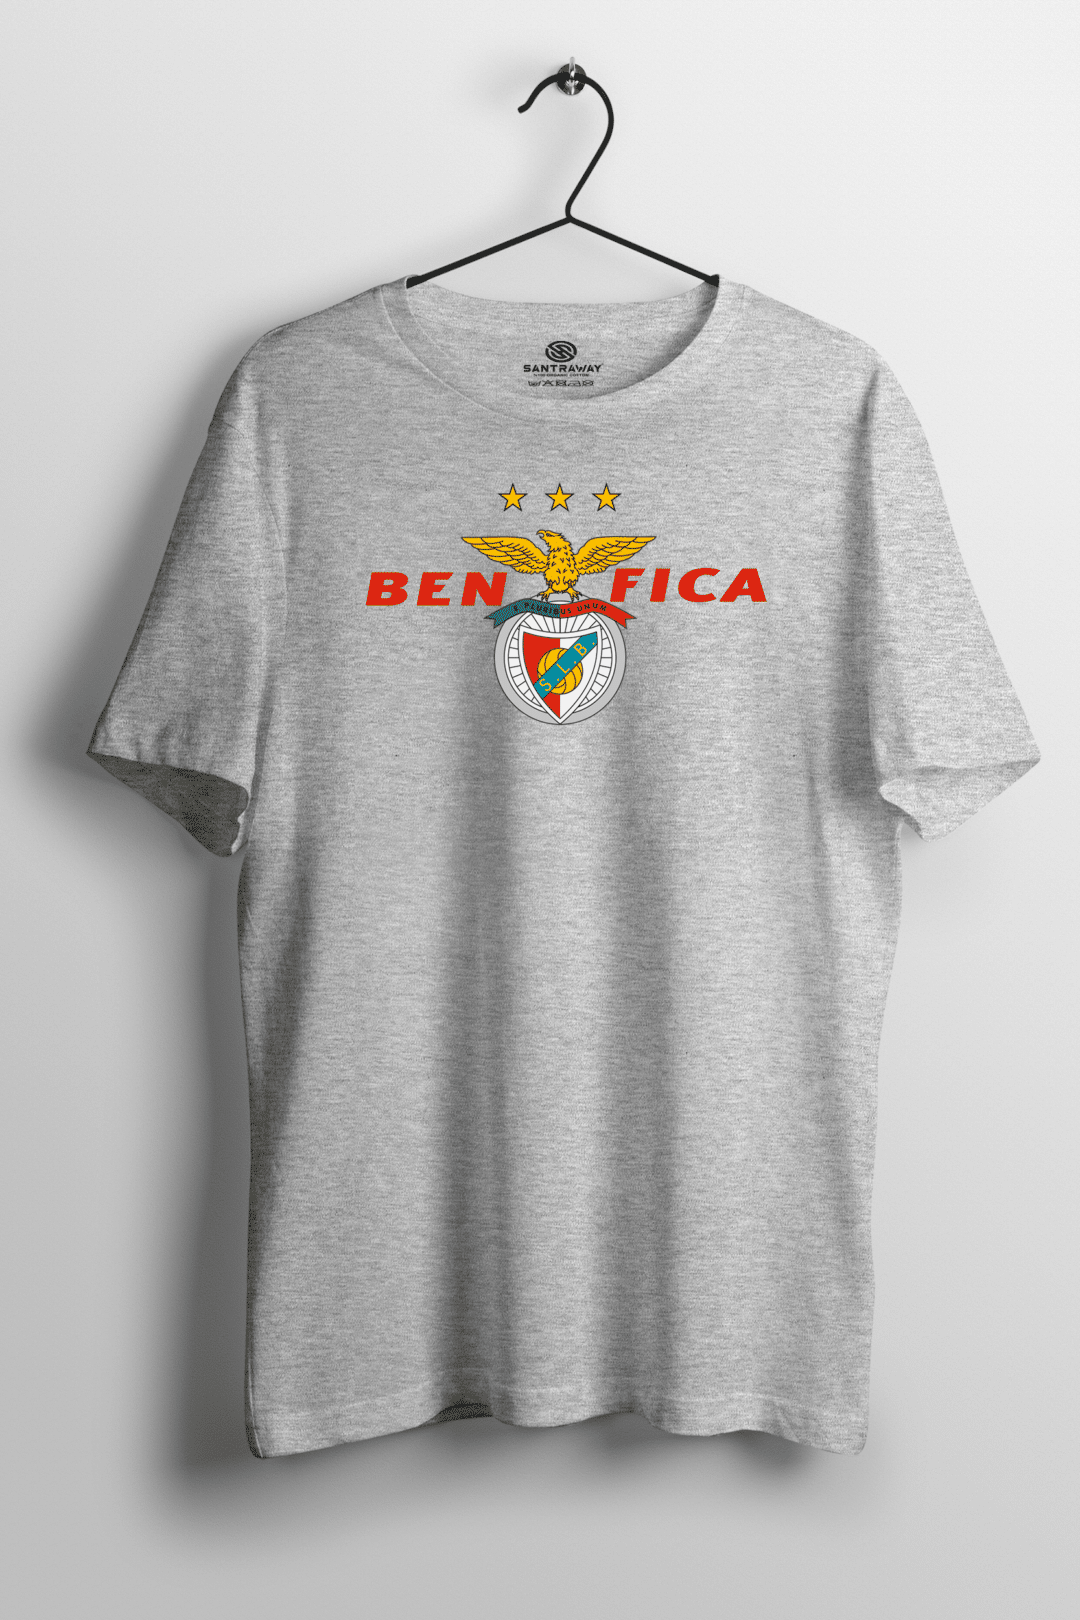 GRI SITE BENFICA